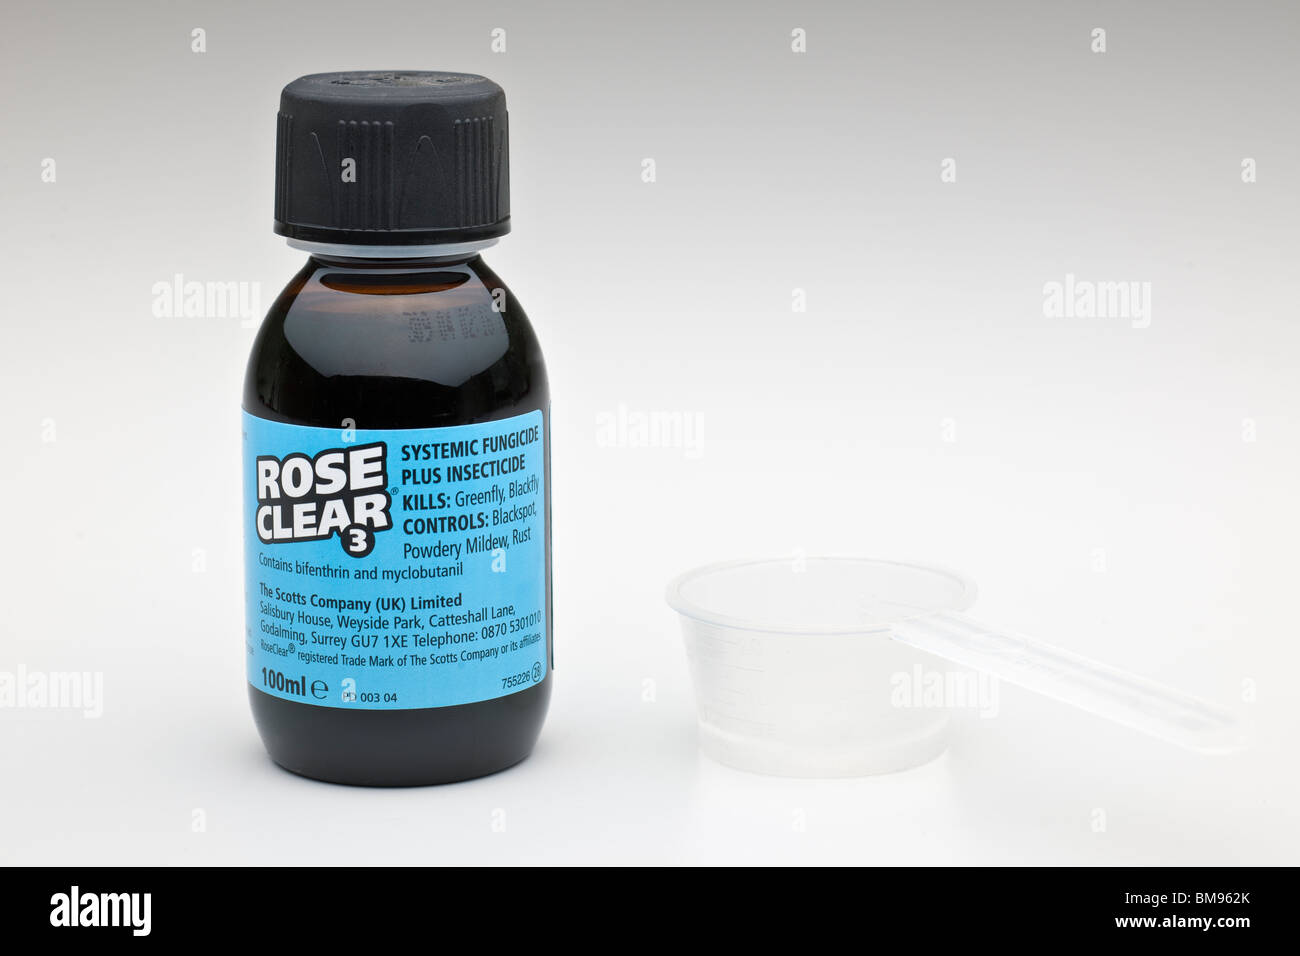 100 ml bottle of Rose Clear Systemic fungicide and measuring spoon Stock Photo